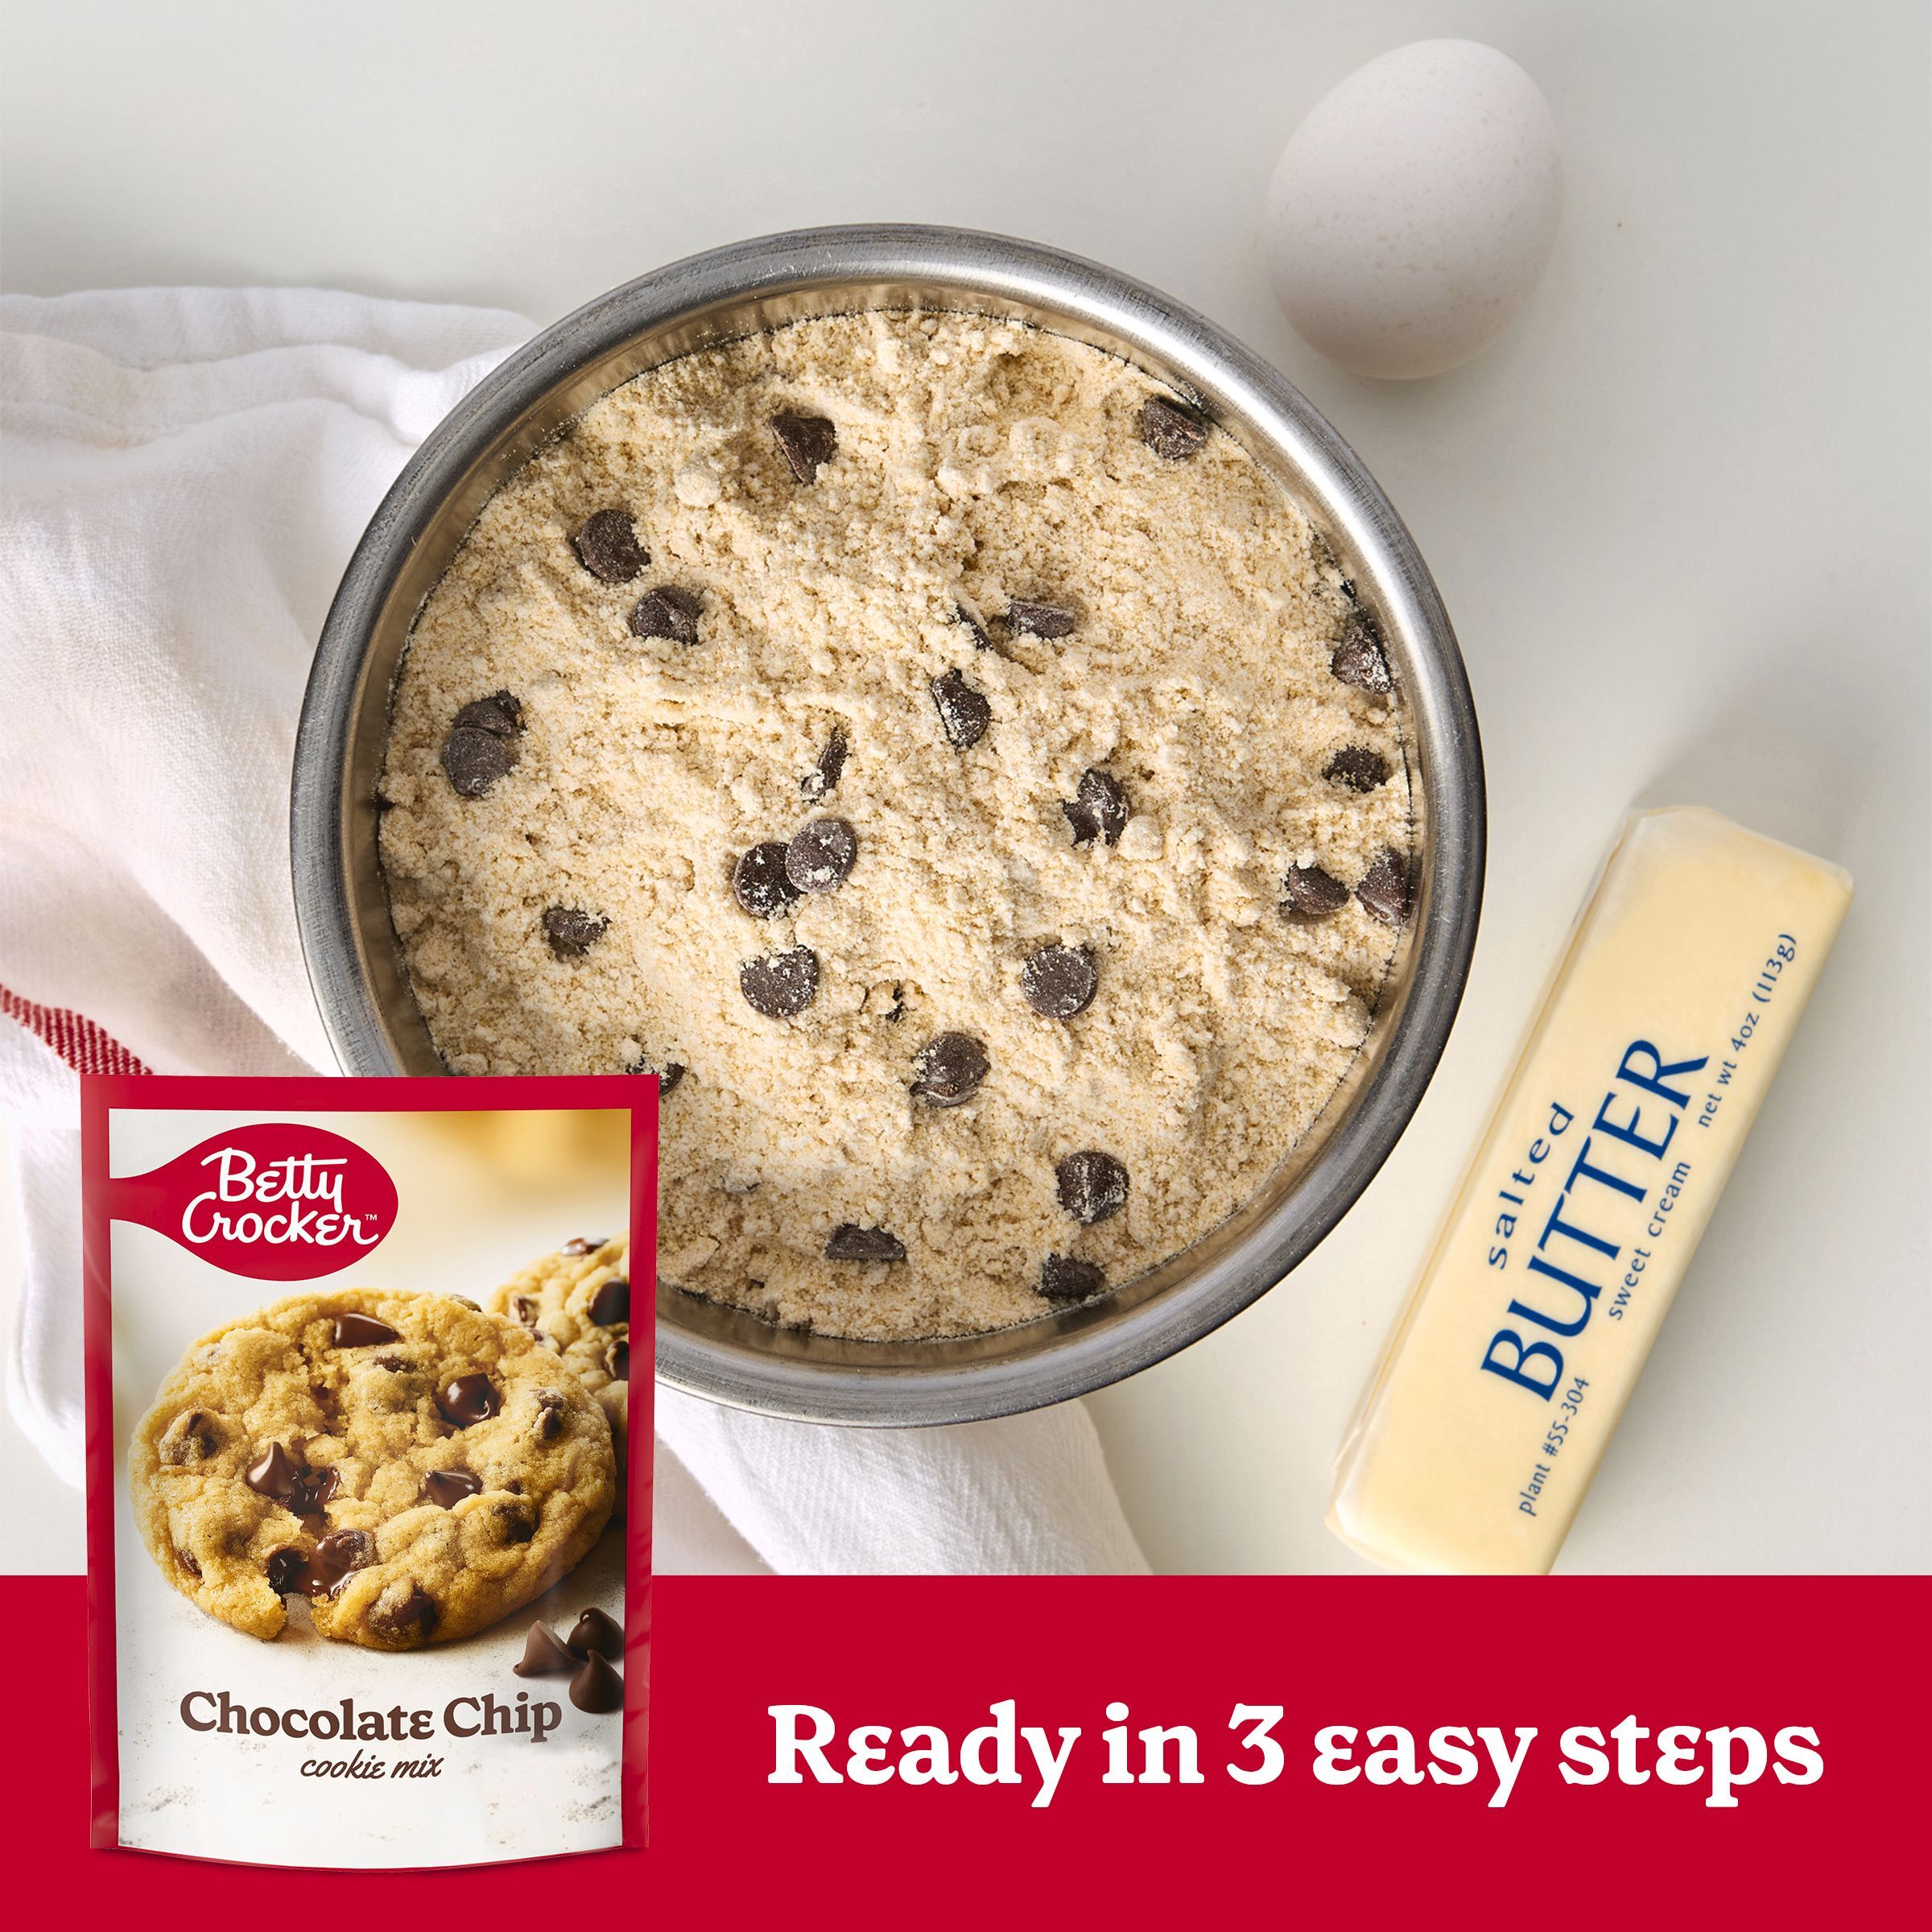 Betty Crocker Chocolate Chip Cookies, Cookie Baking Mix, 17.5 oz - image 4 of 9